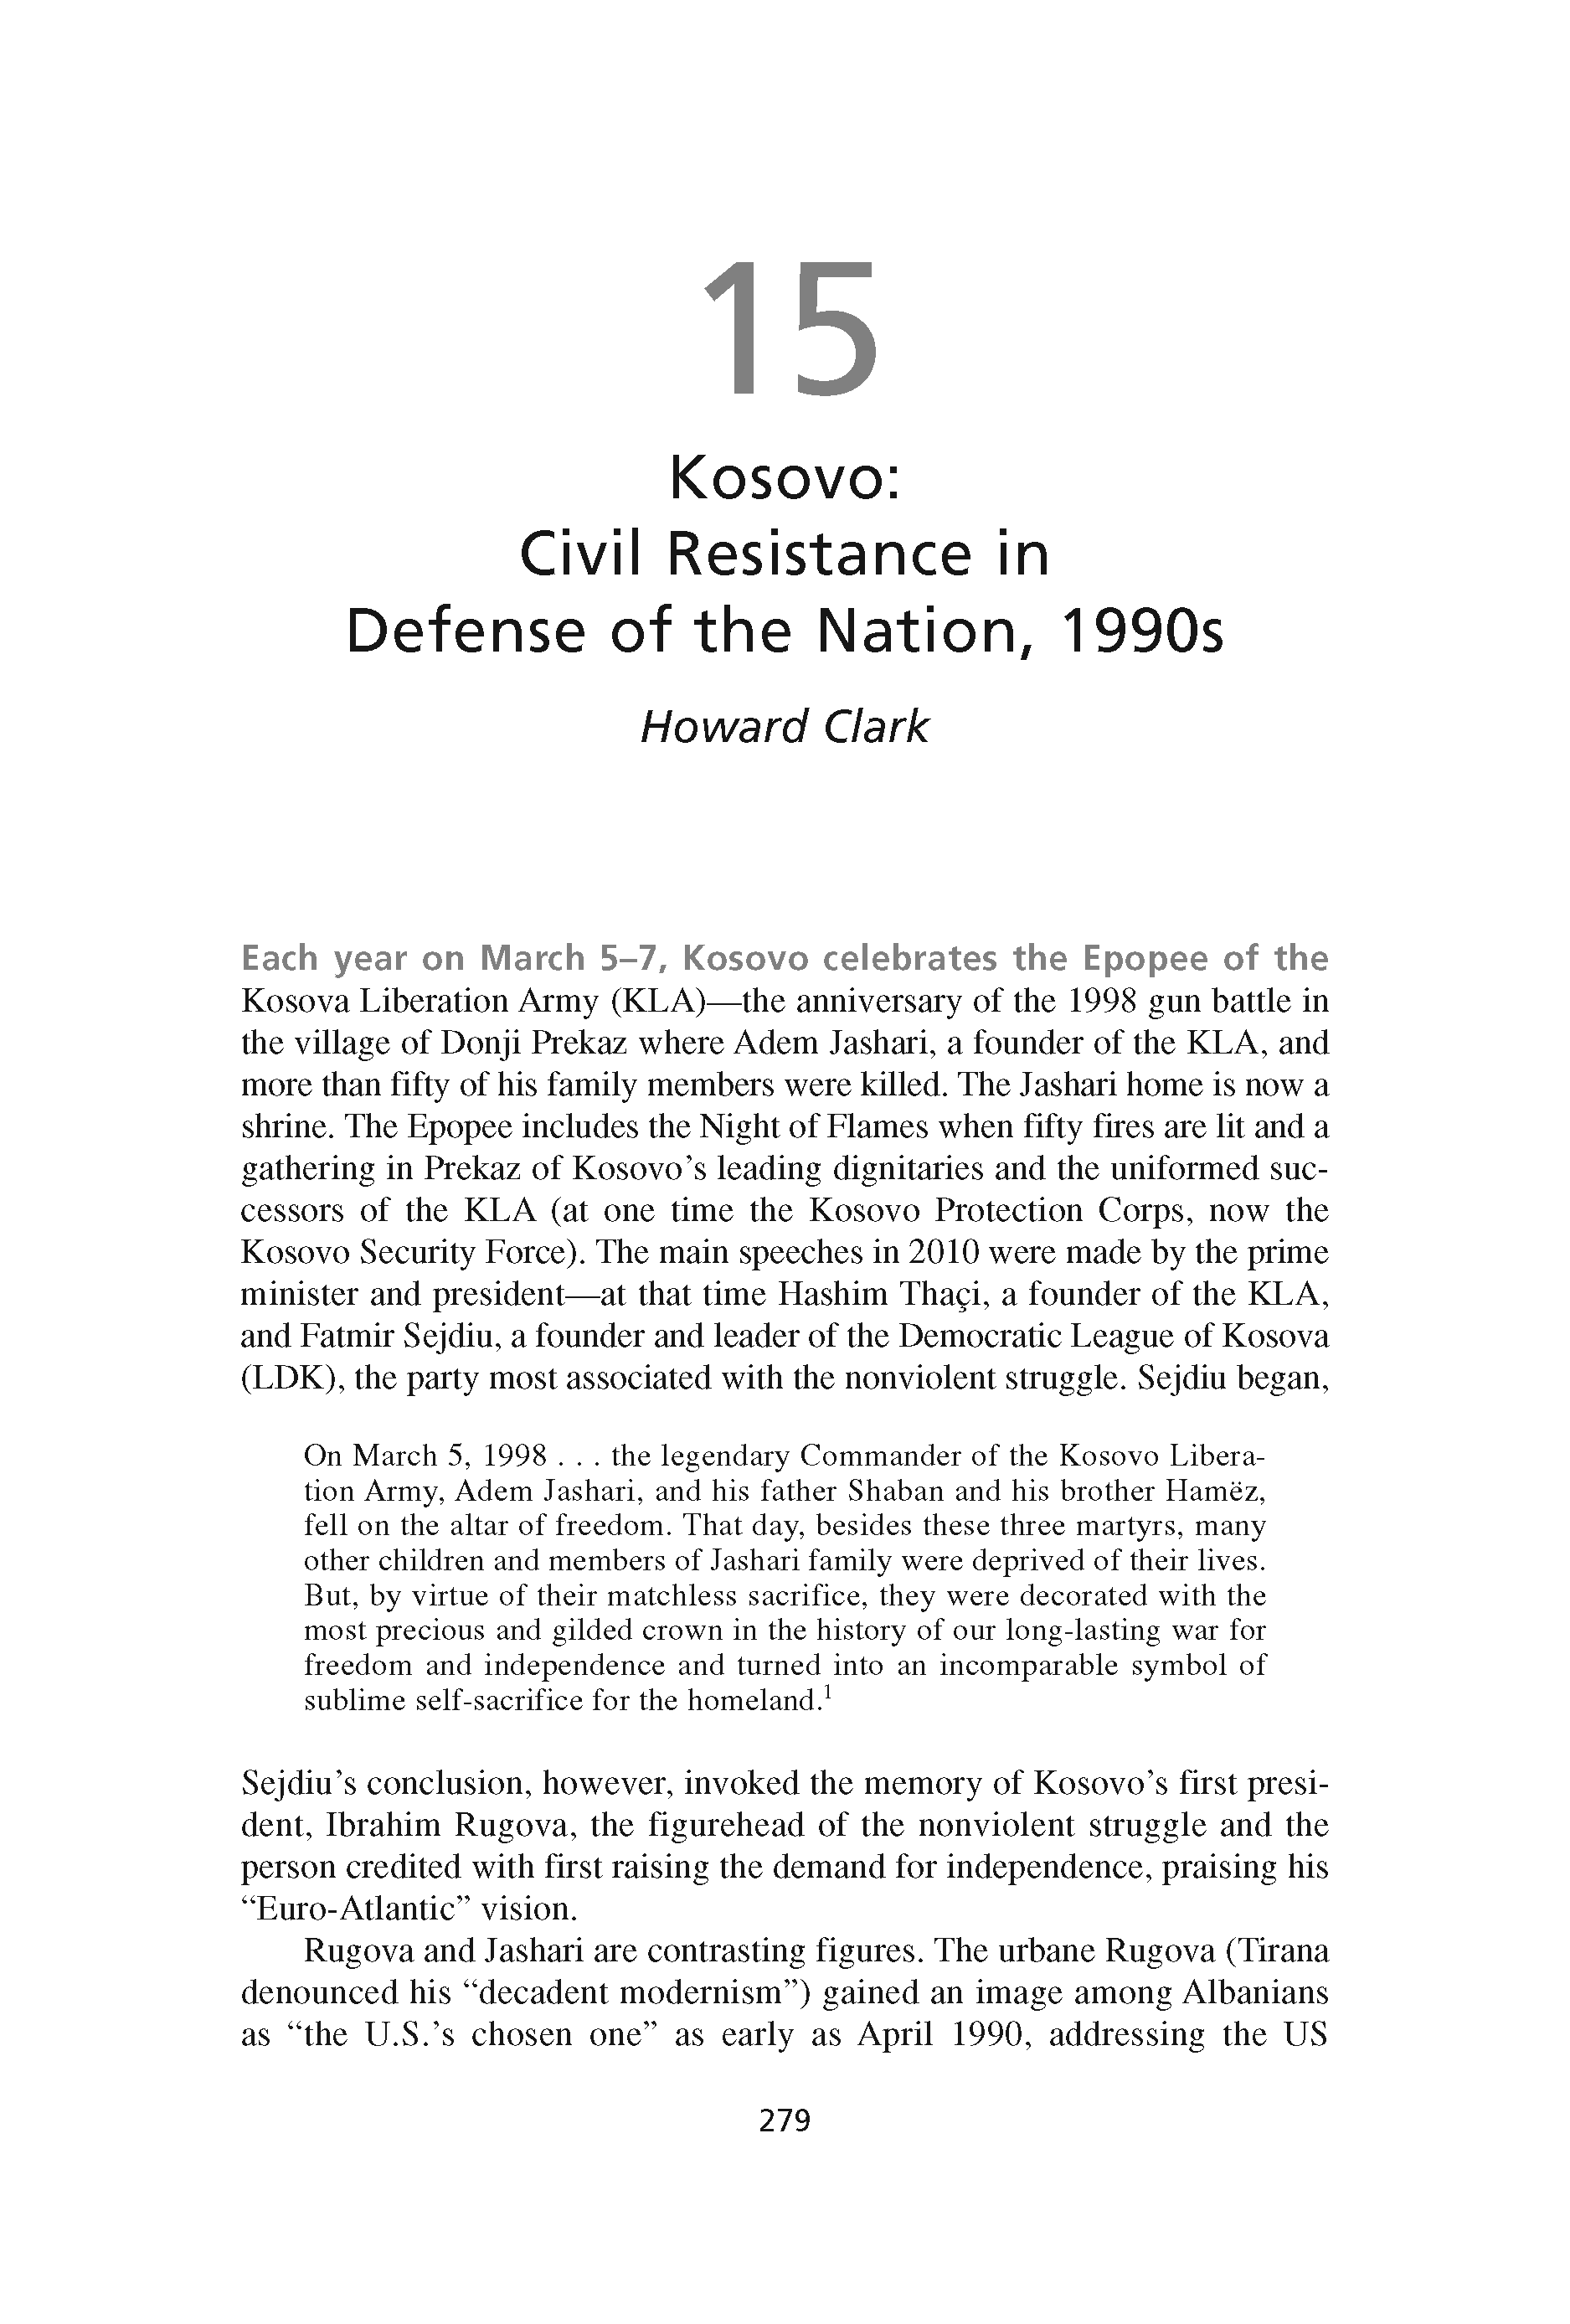 Kosovo: Civil Resistance in Defense of the Nation, 1990s (Chapter 15 from ‘Recovering Nonviolent History’)